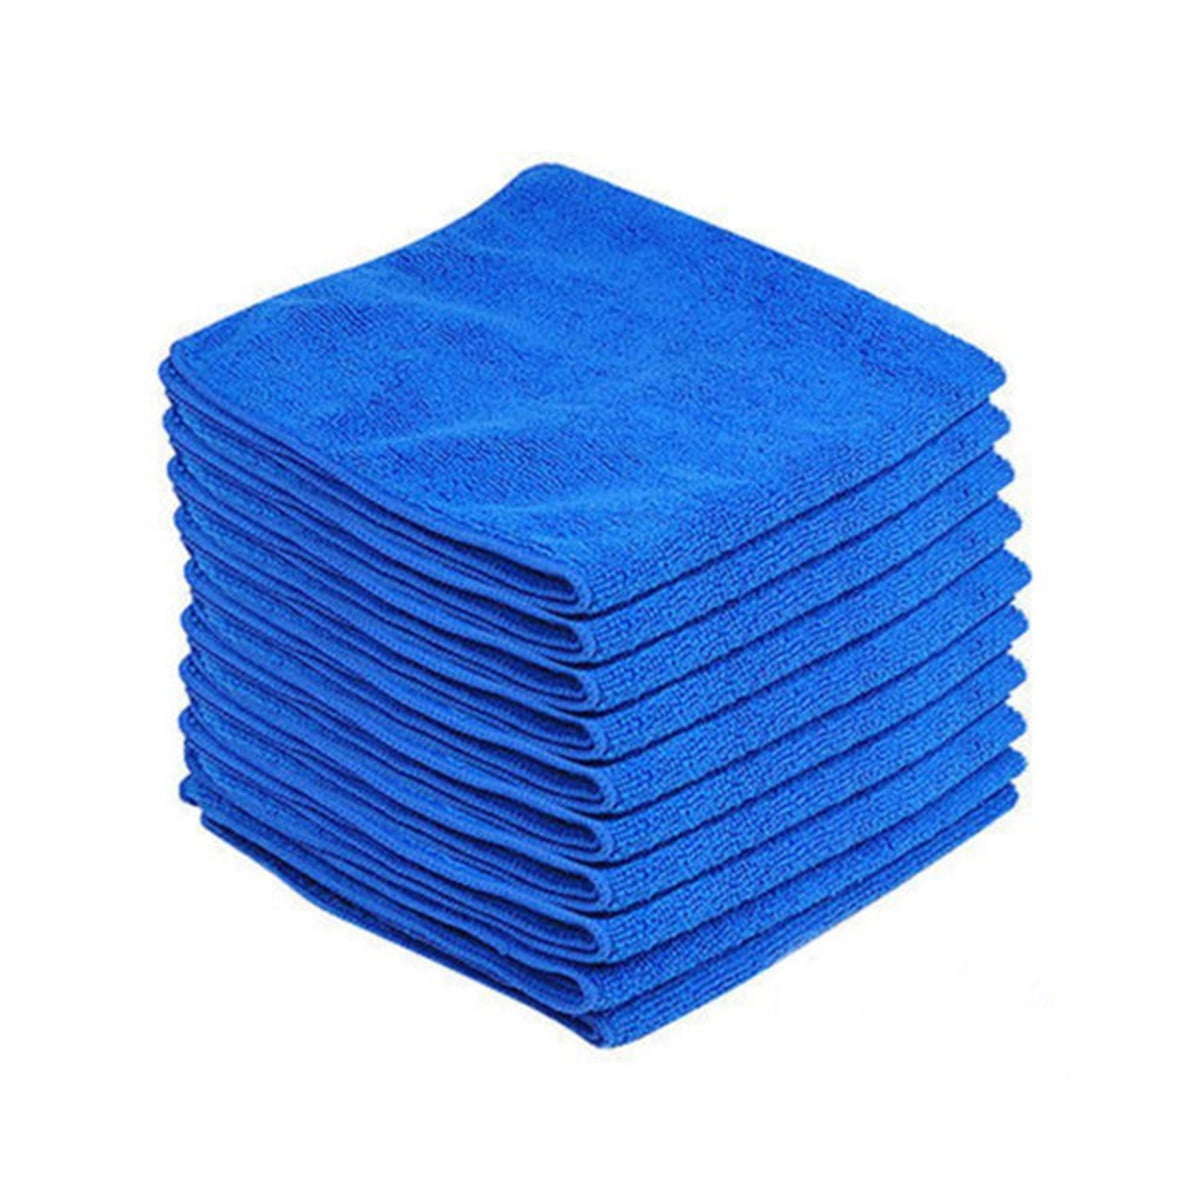 Set of 10 Large Micro fibre Cloth  Dusters Polishing Was £13.99 